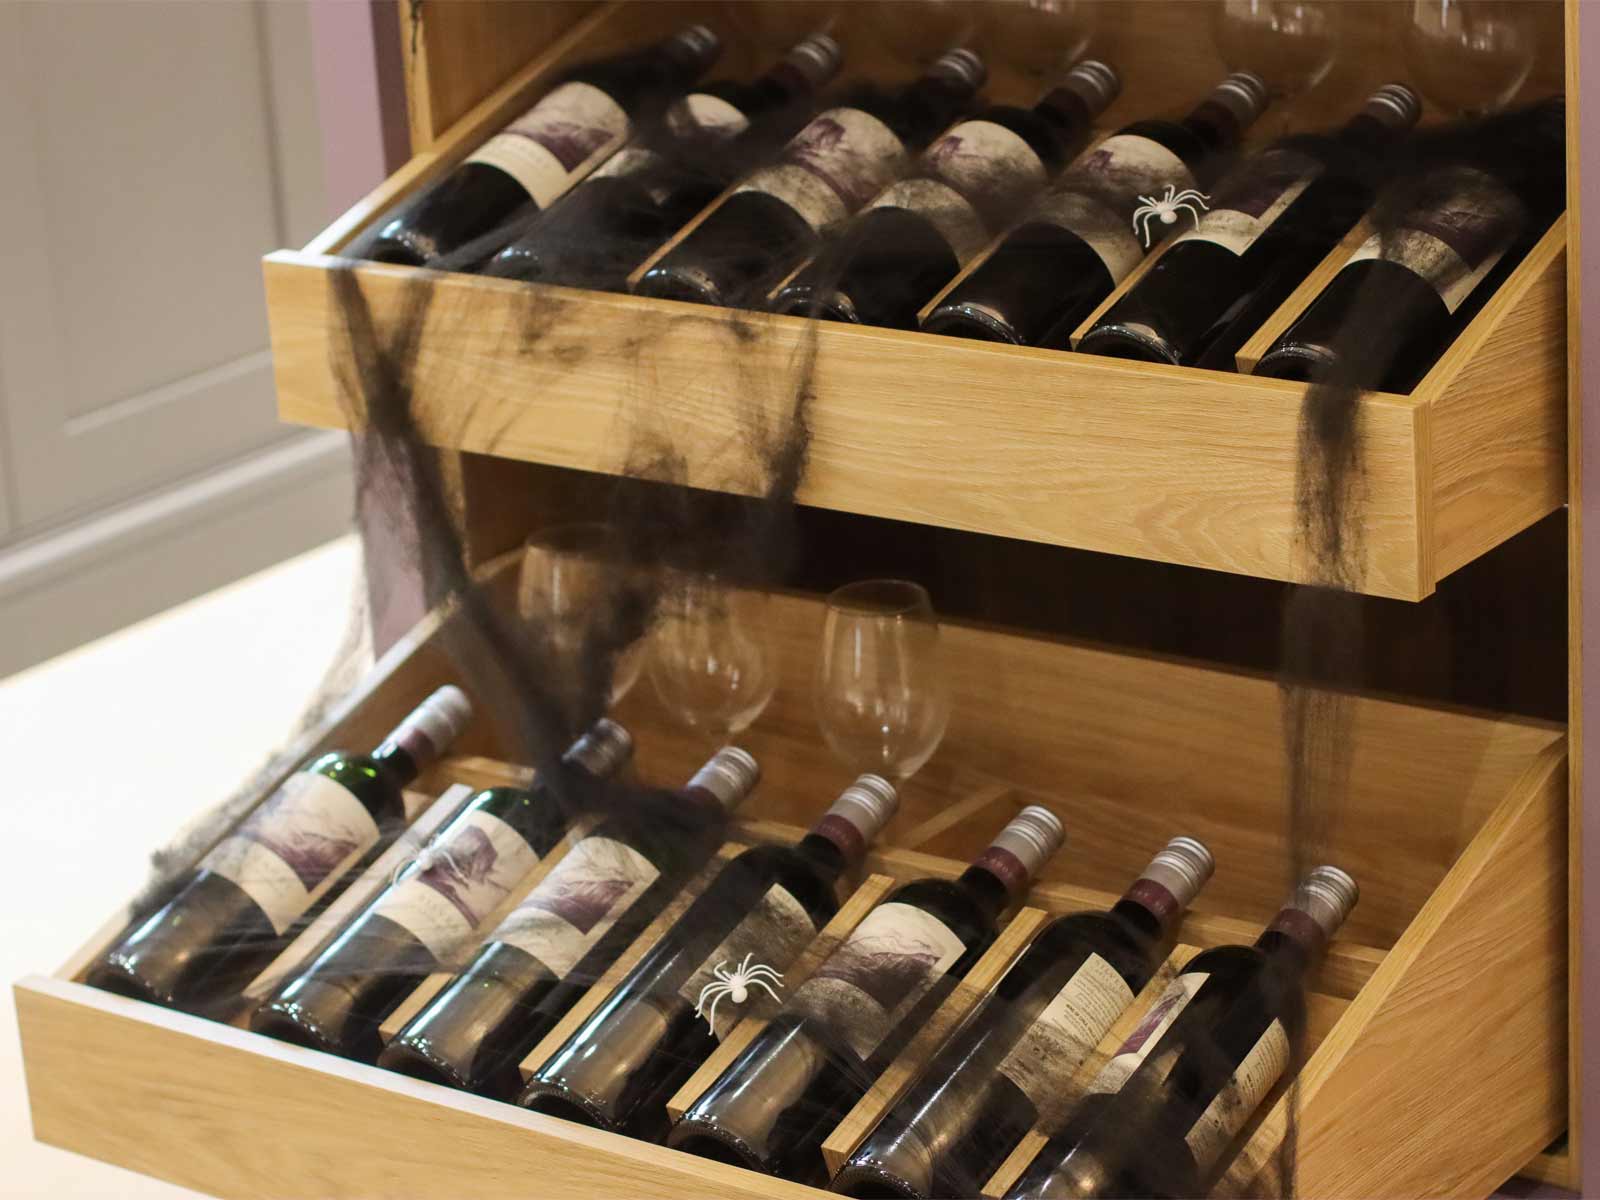 Two shelves for wine bottles including red wine and wine glassware